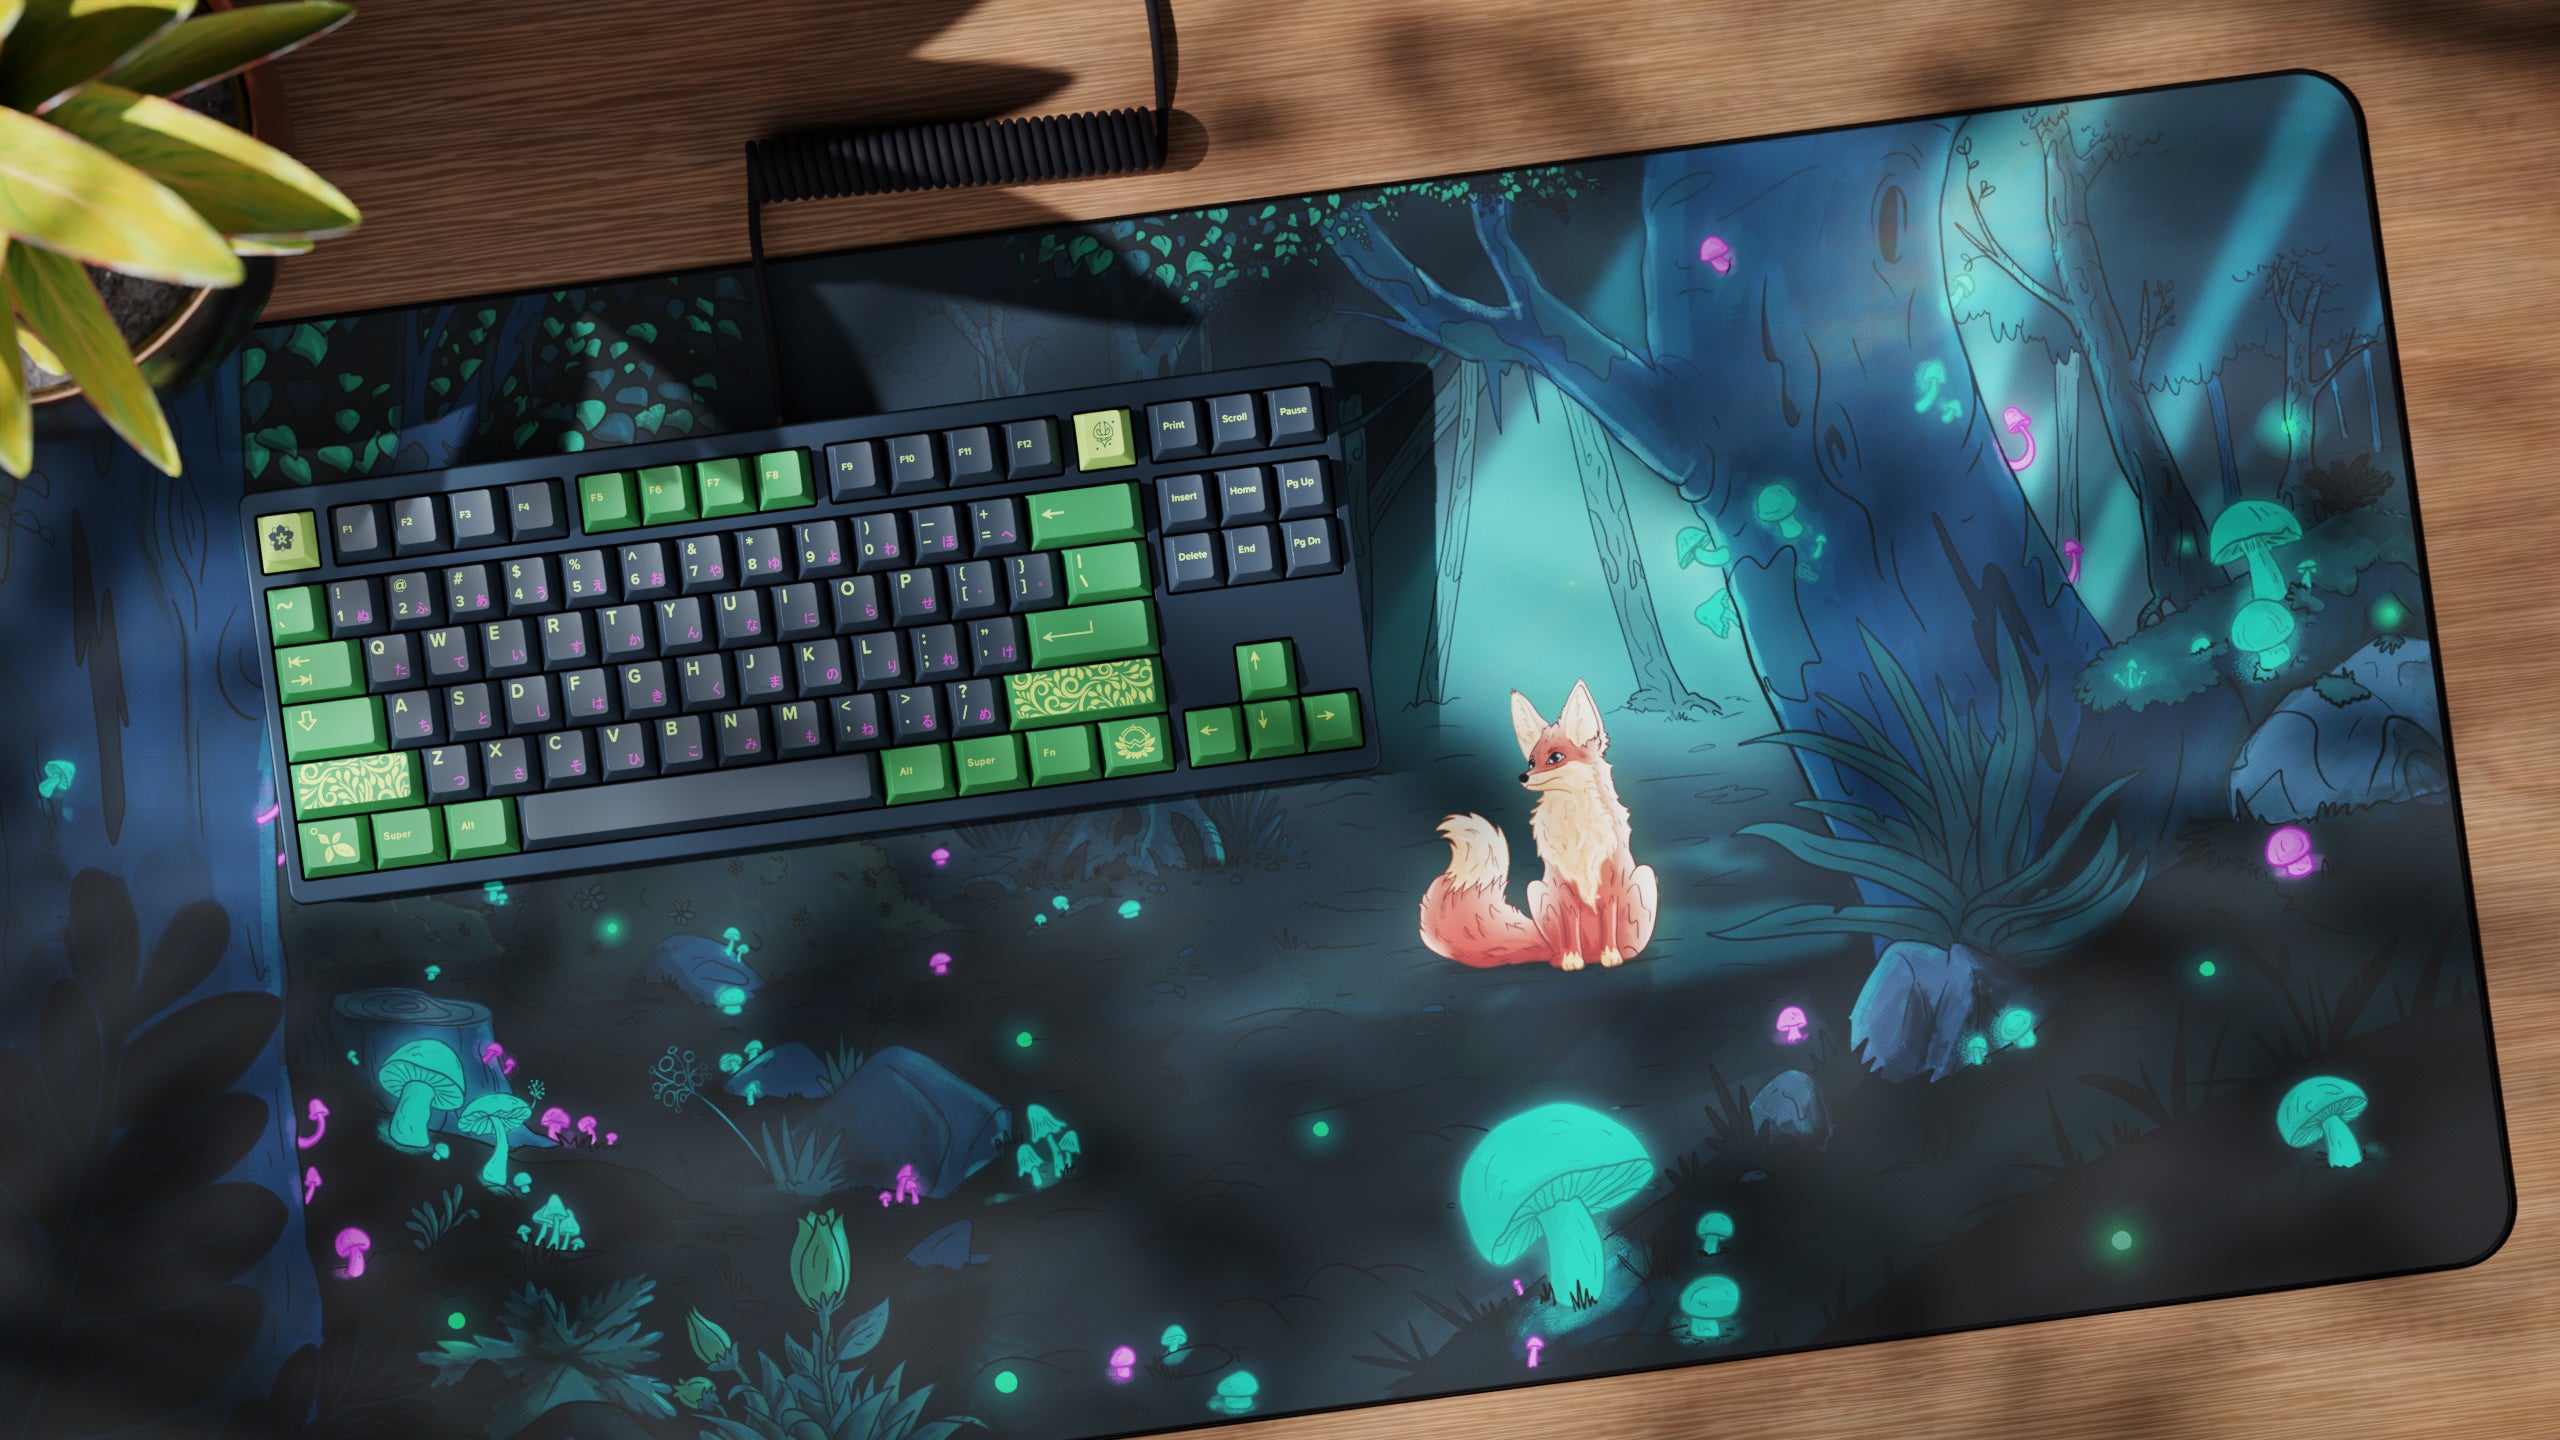 kfaPBT Forest Watcher keycaps navy and green mechanical keyboards. Inspired by lush greenery of a forest with a touch of magic.  Also has a matching Deskmat design. 